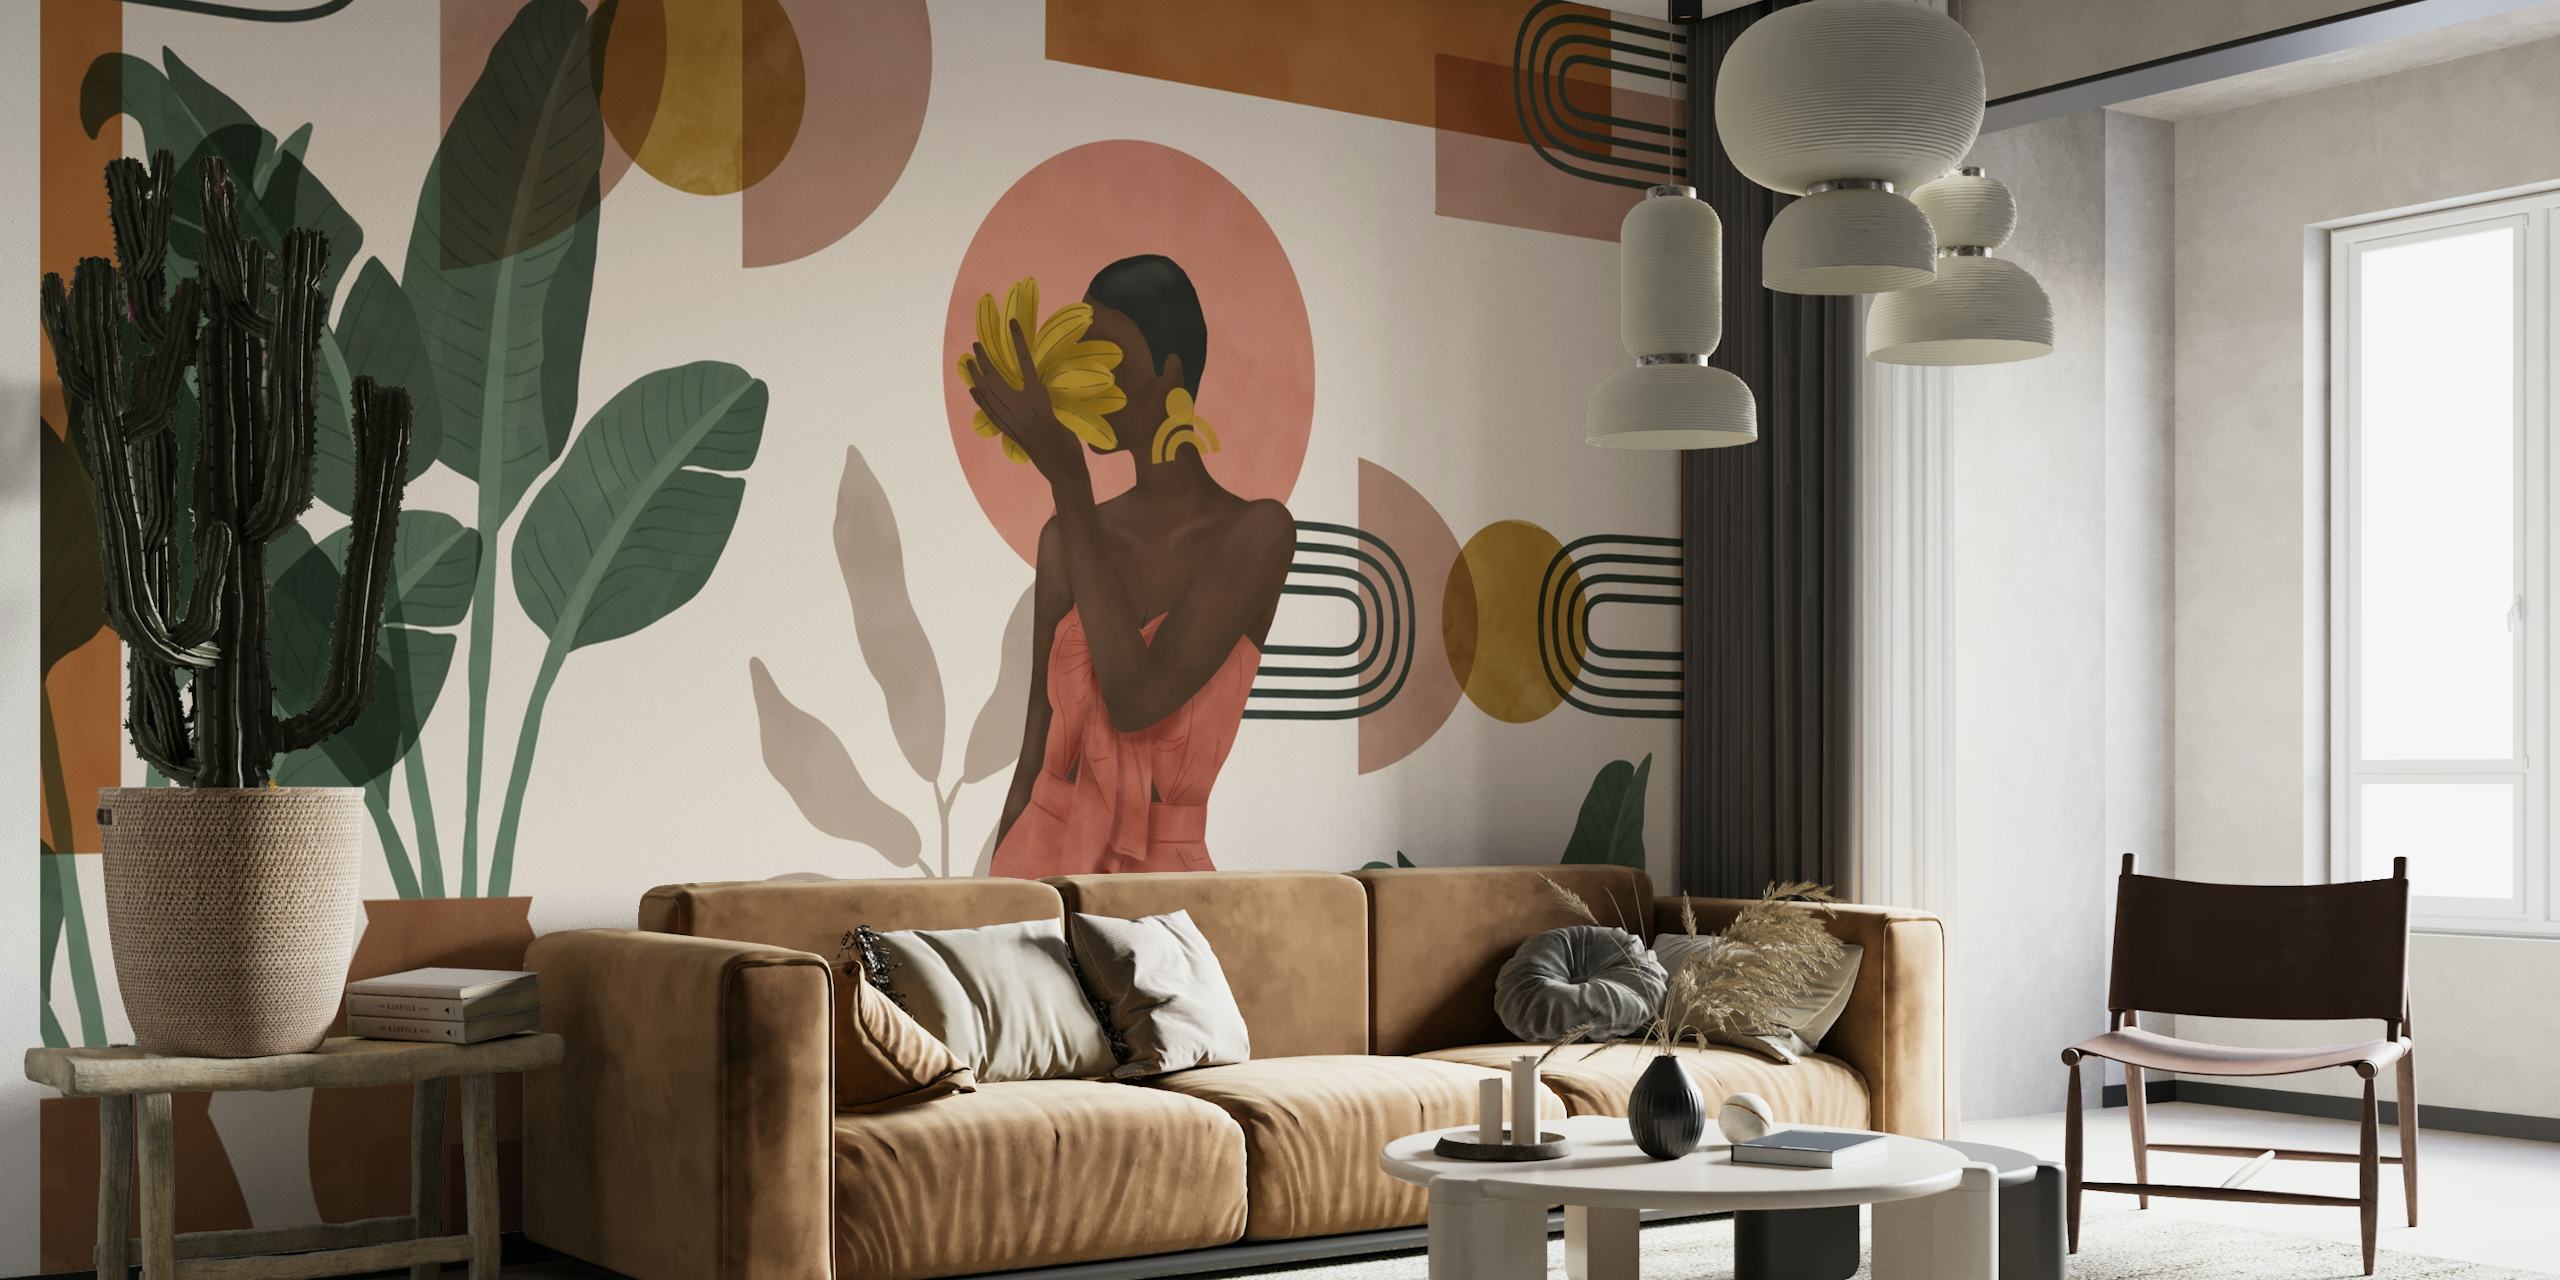 Abstract botanical wall mural with stylized woman and banana plant elements in earthy tones